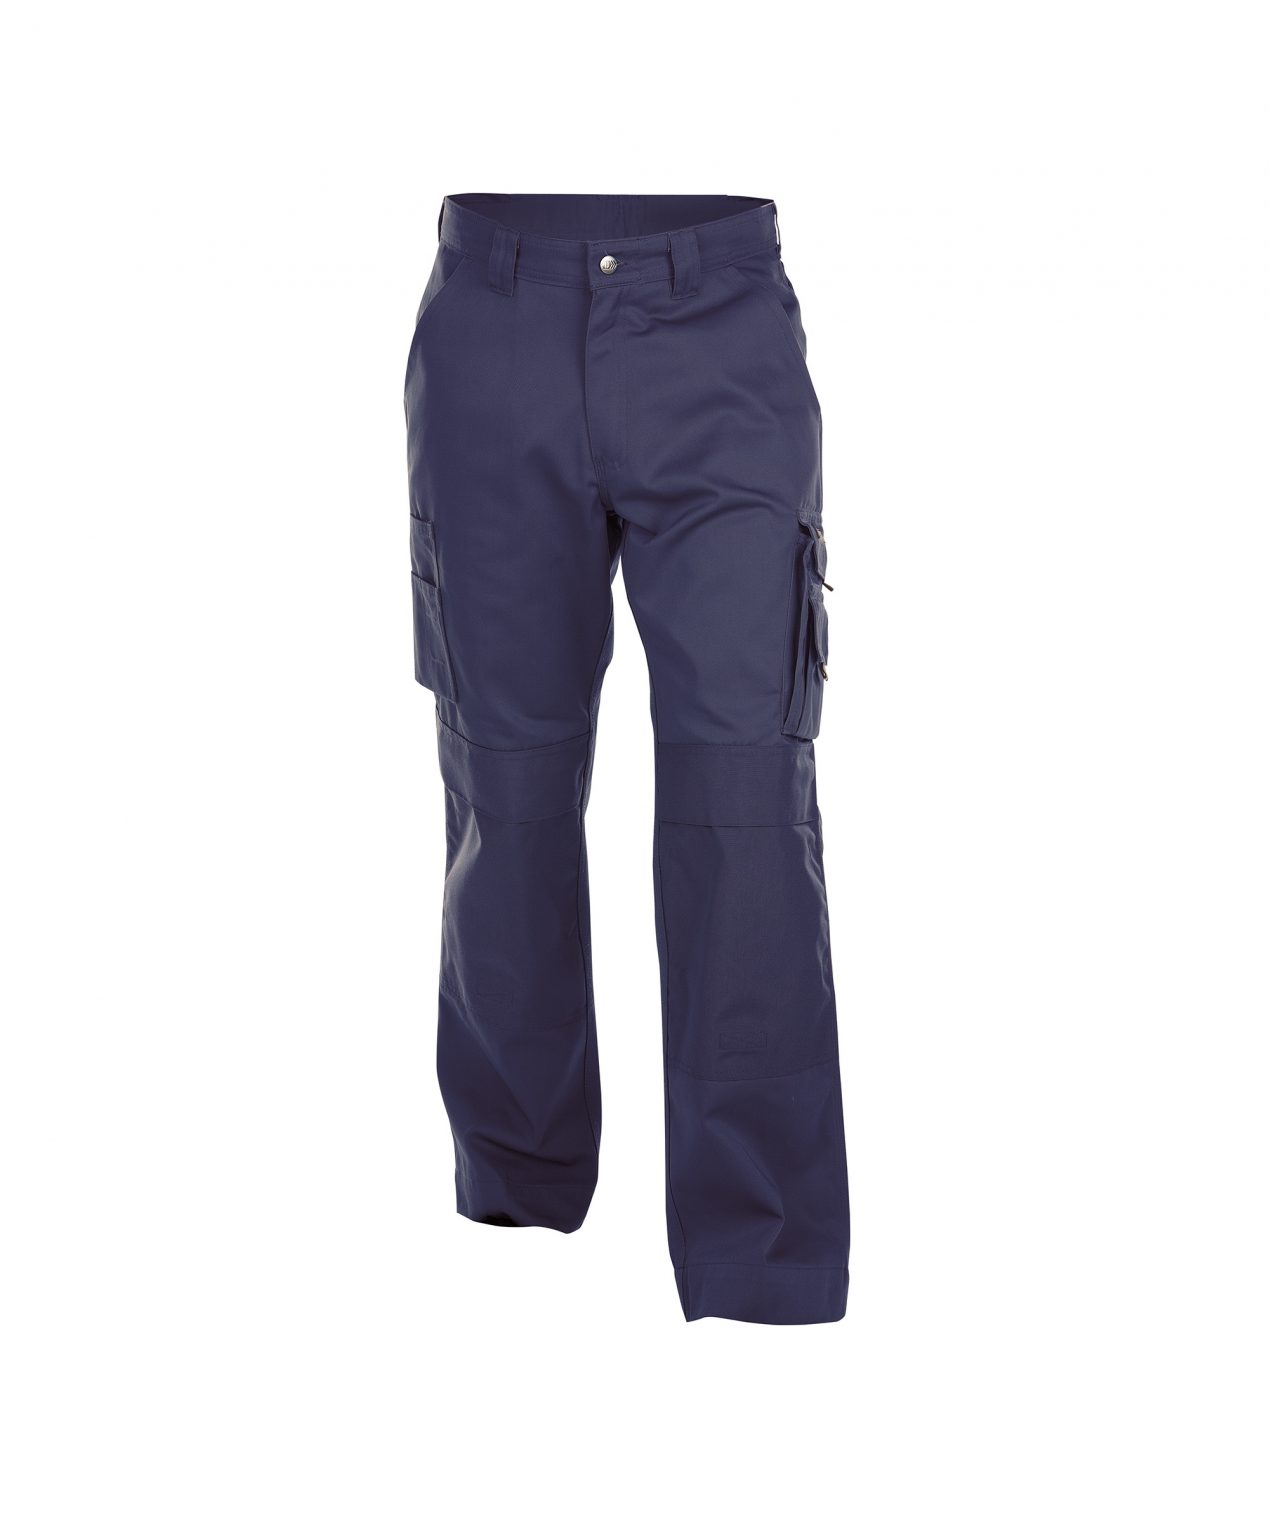 miami work trousers with knee pockets navy front